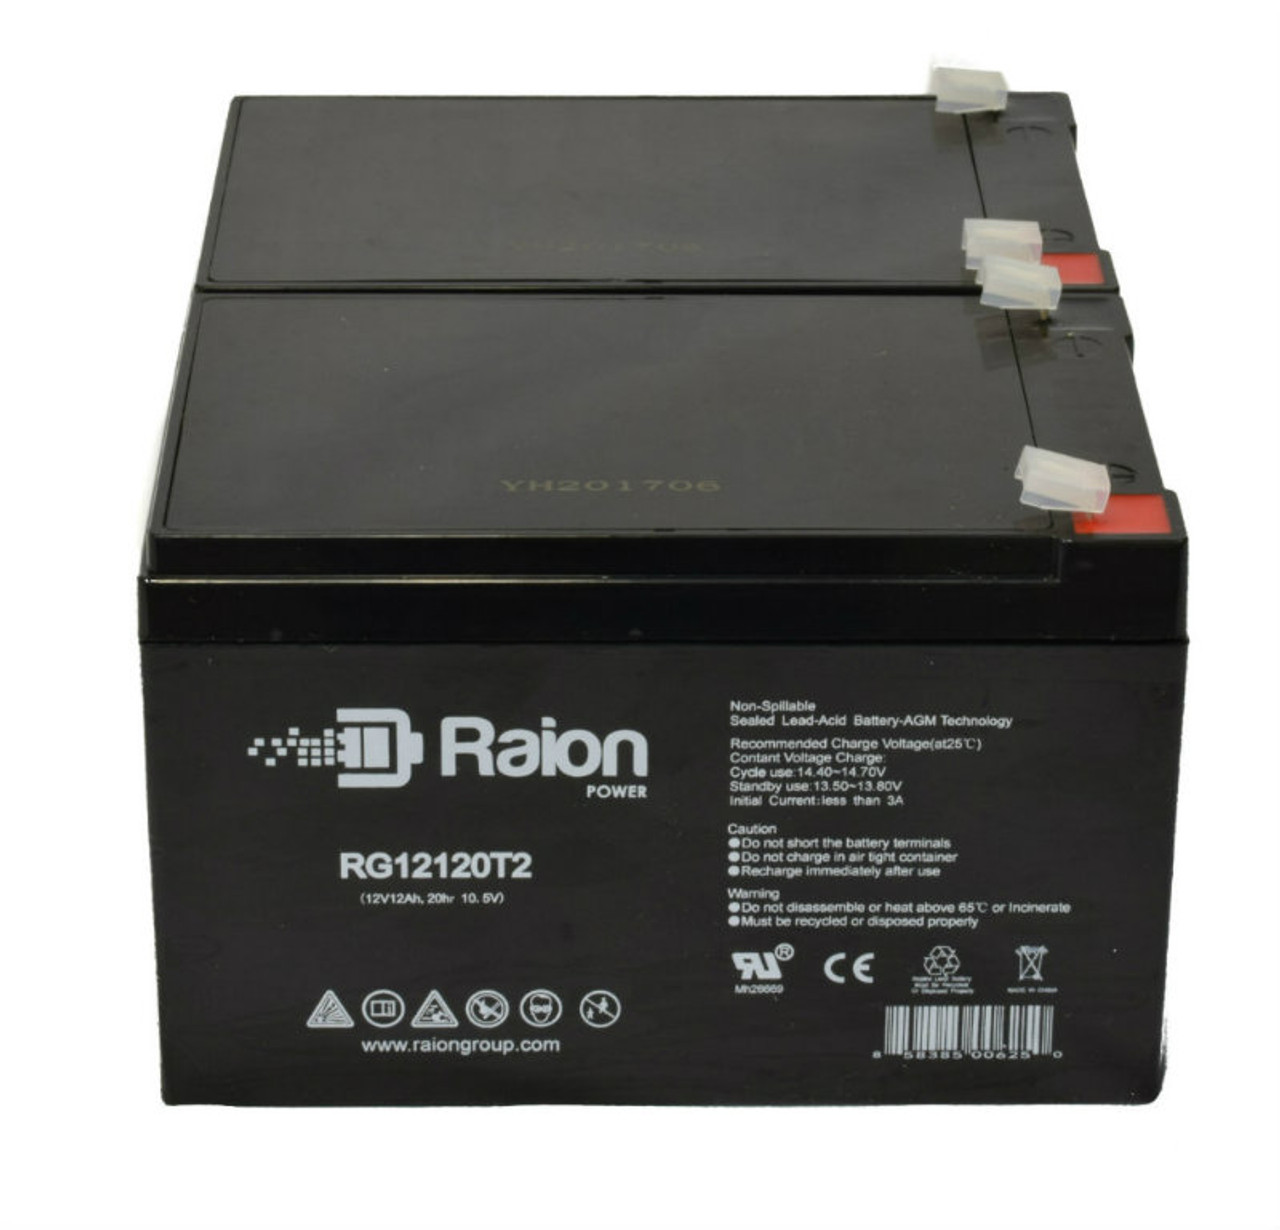 Raion Power RG12120T2 Replacement Emergency Light Battery for Sonnenschein CR1212 - 2 Pack